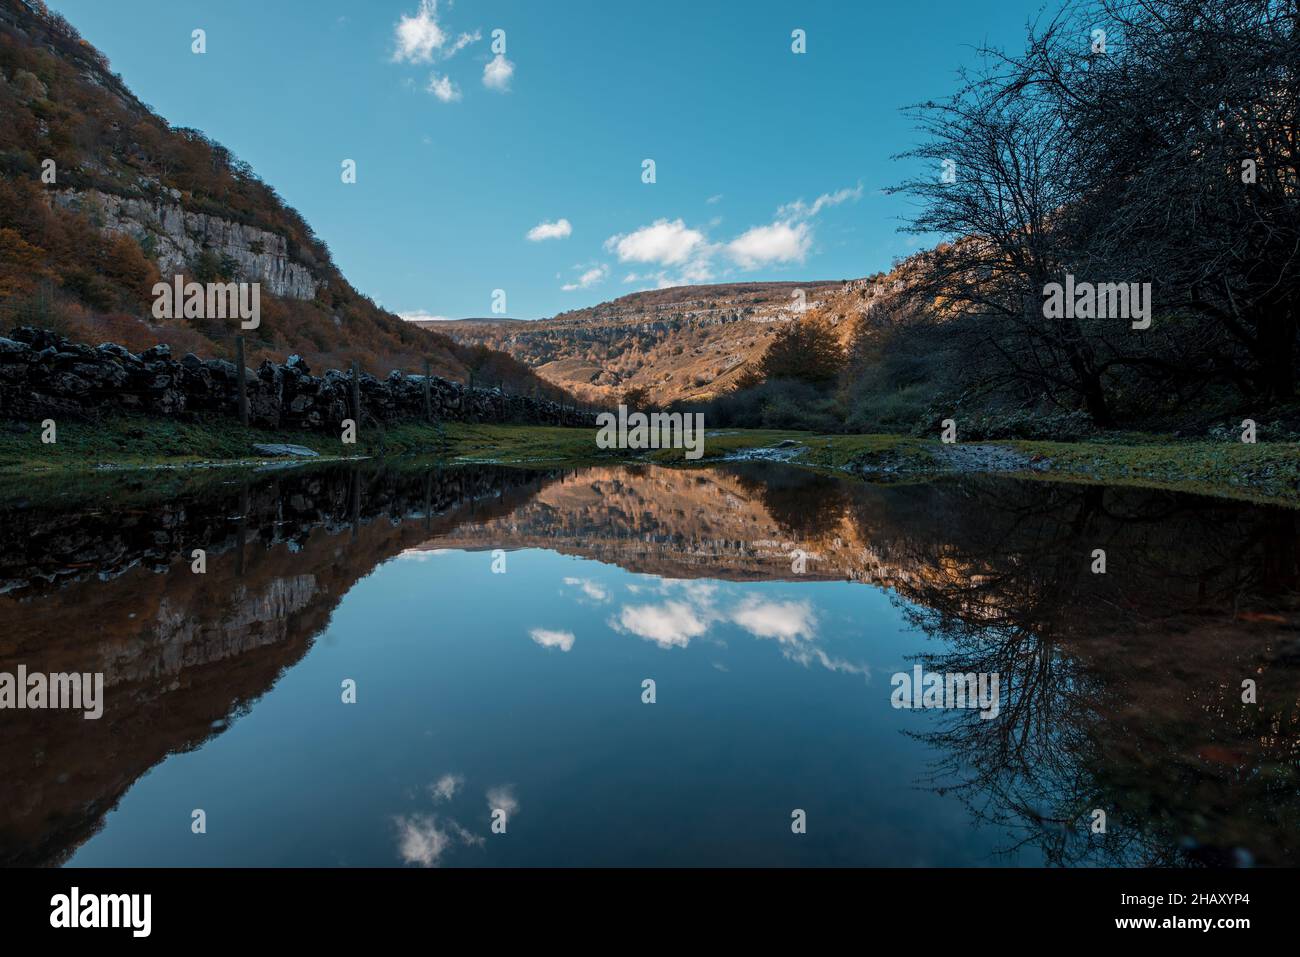 Picturesque view of calm lake surrounded by trees and and grass against Cantabria mountains in autumn under blue sky Stock Photo